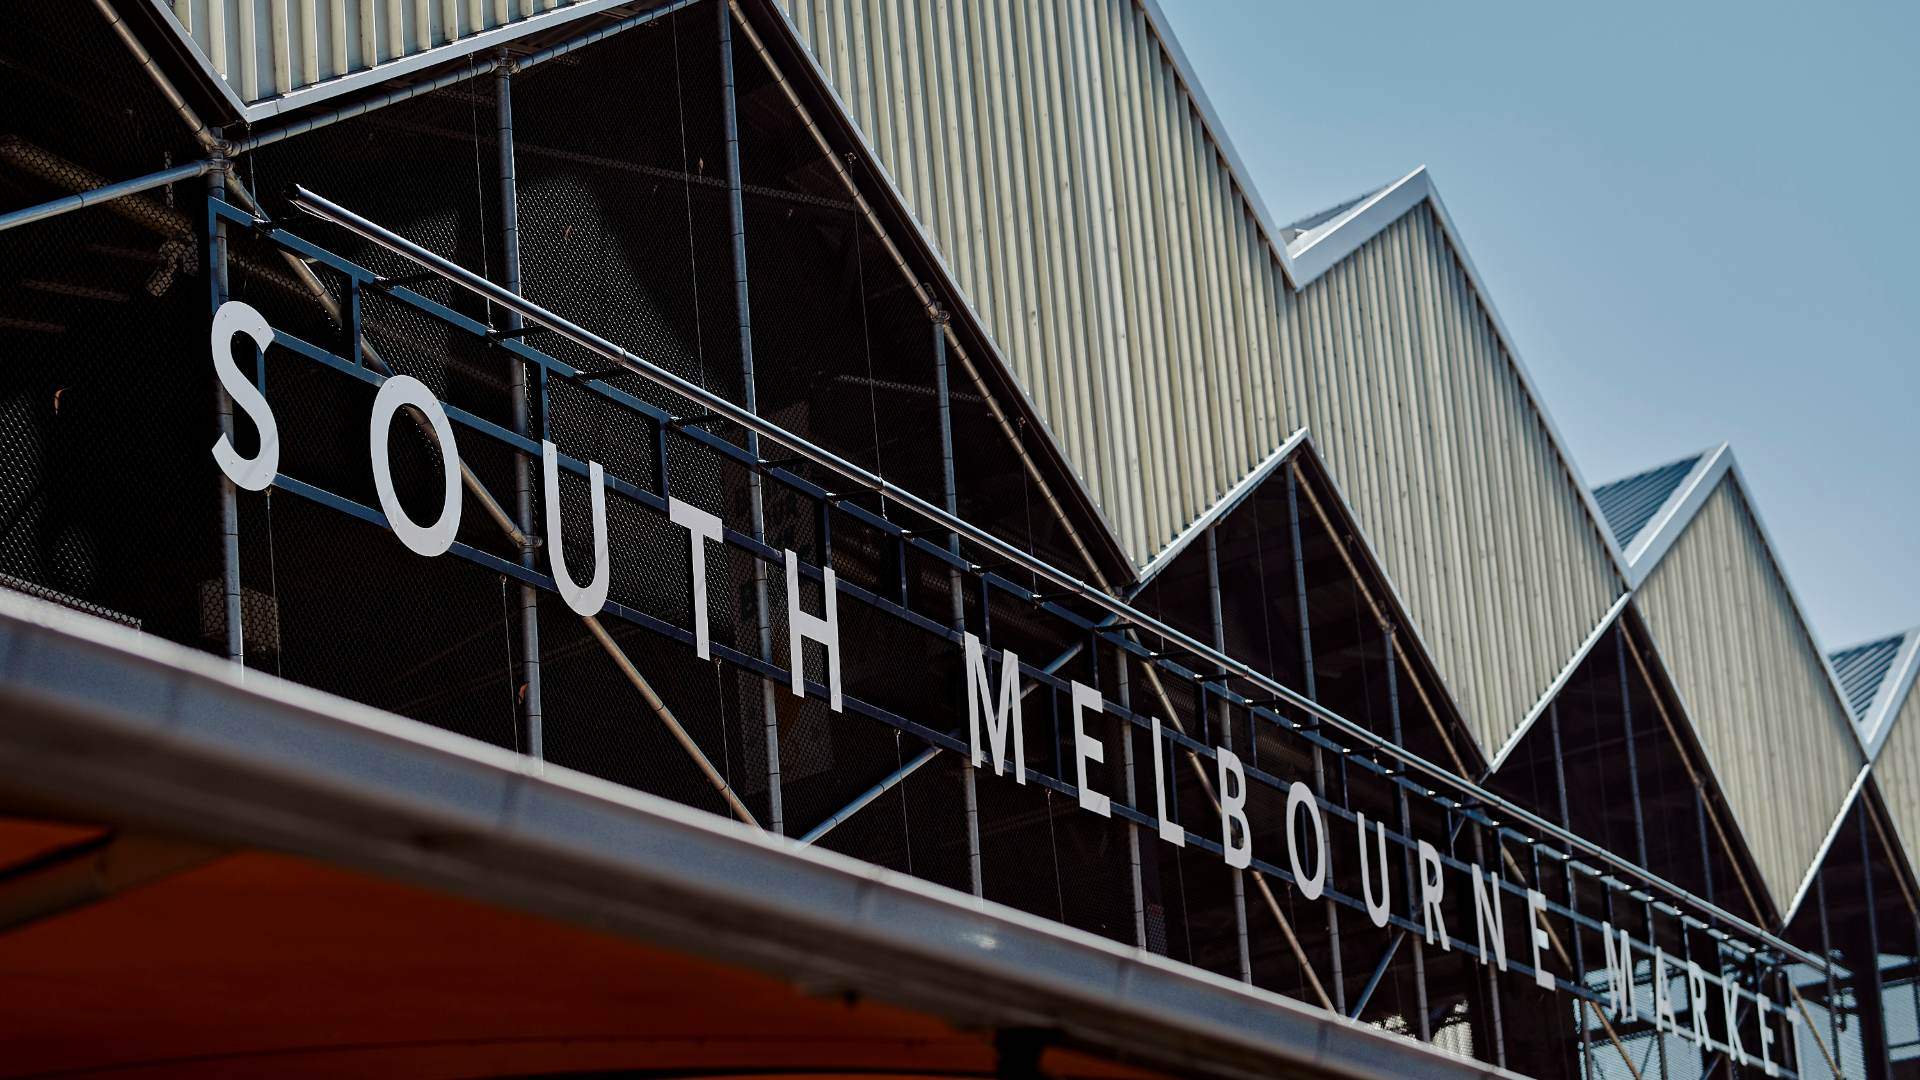 South Melbourne Market Has Launched a Drive-Thru Grocery Pick-Up Point